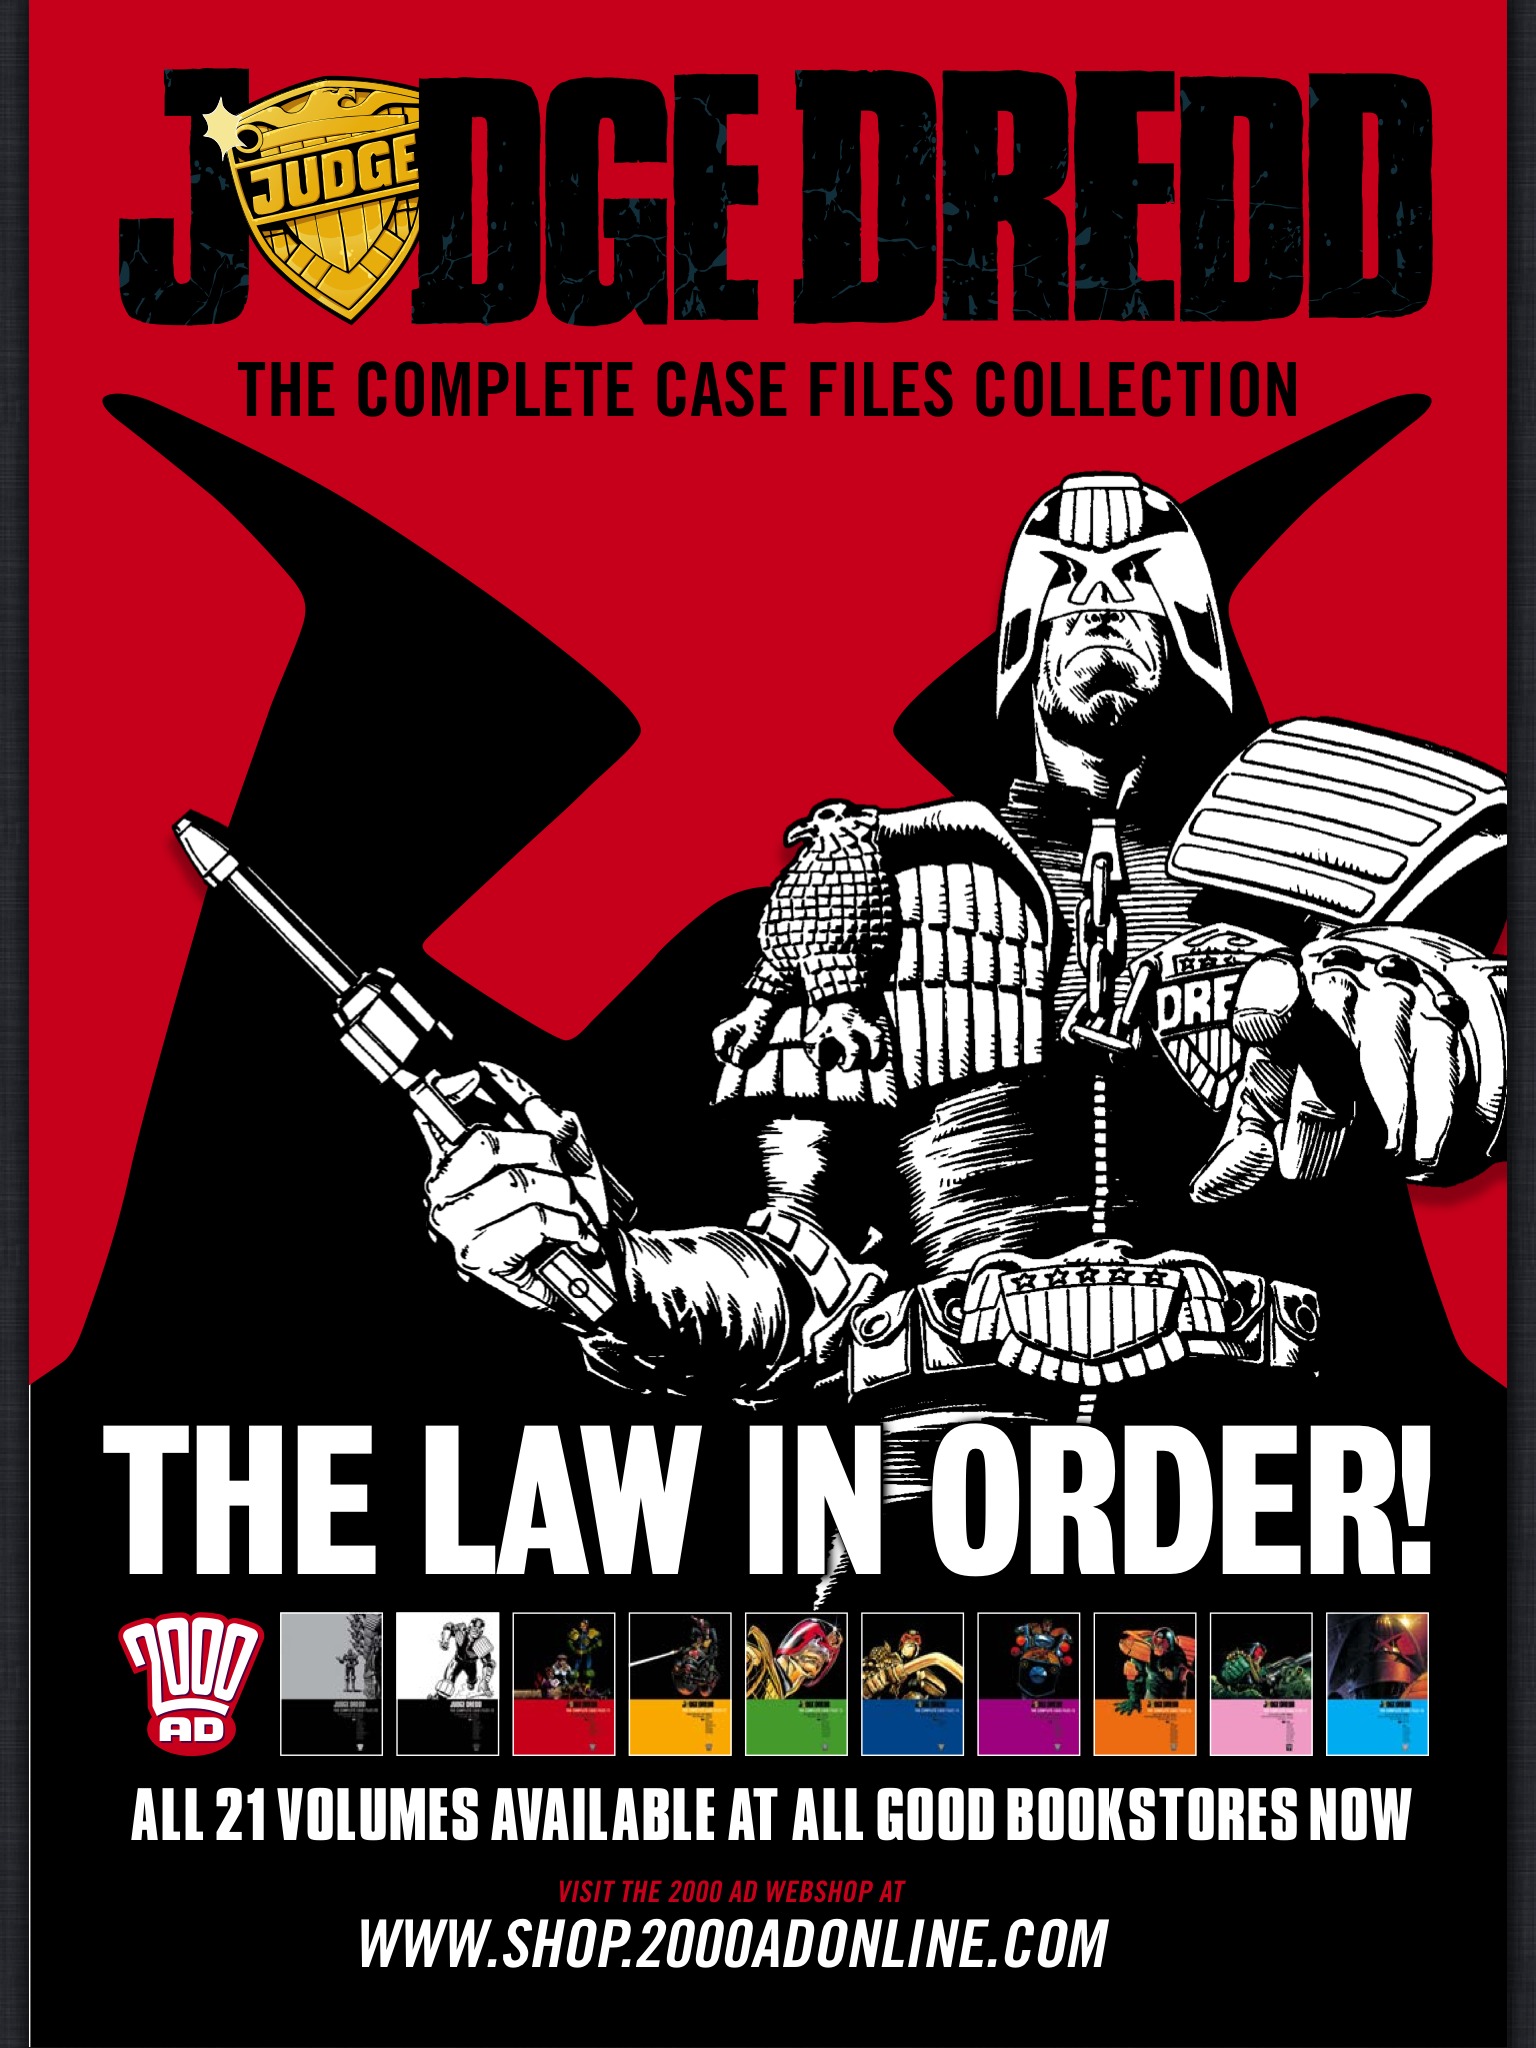 Read online Judge Dredd: The Complete Case Files comic -  Issue # TPB 19 - 321